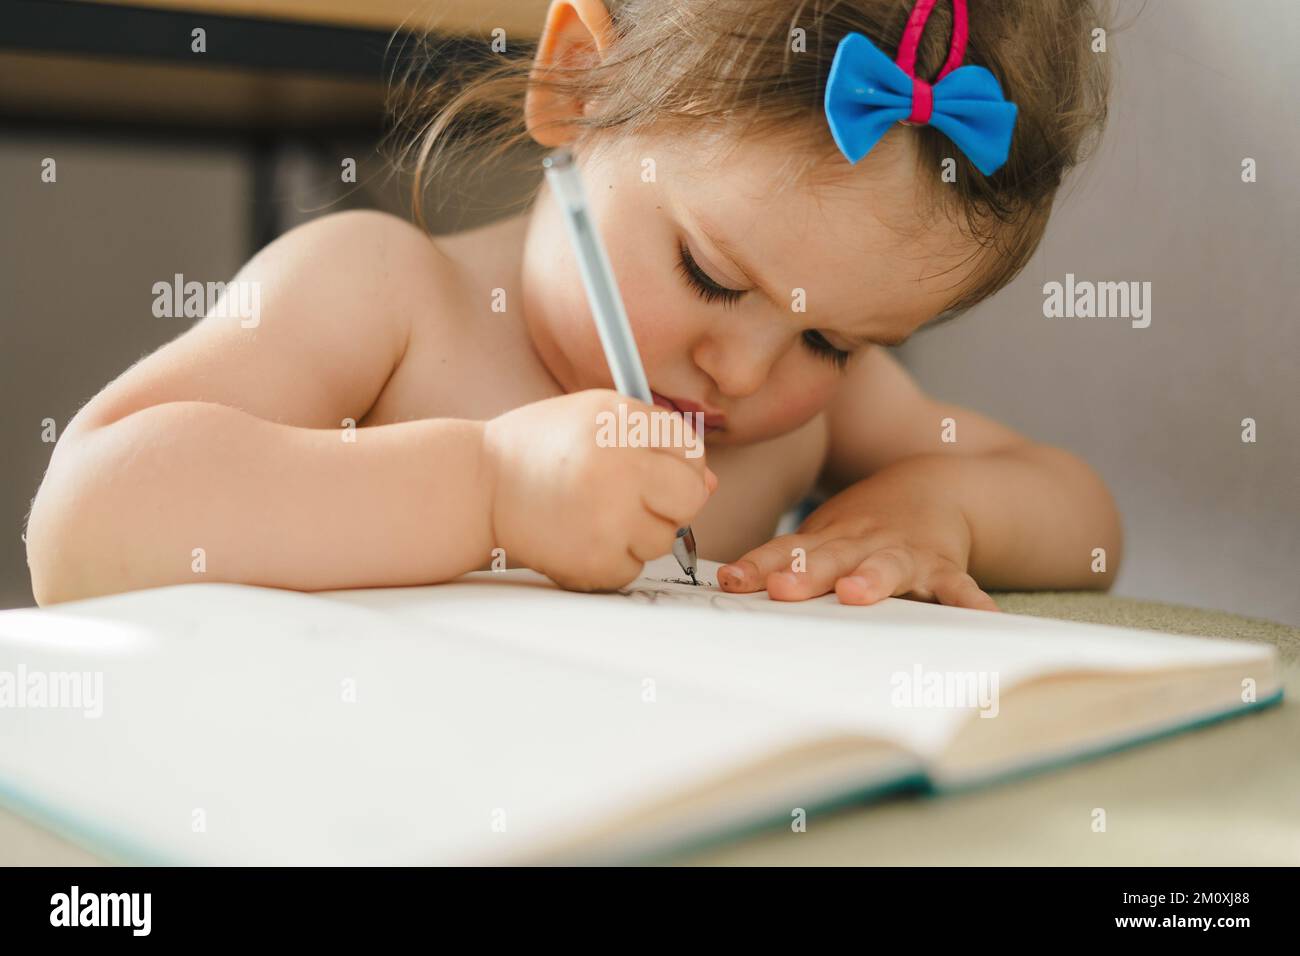 Baby girl having fun with pencil and drawing on paper at table at home. Creative thinking and artistic concepts. Education concept. Stock Photo